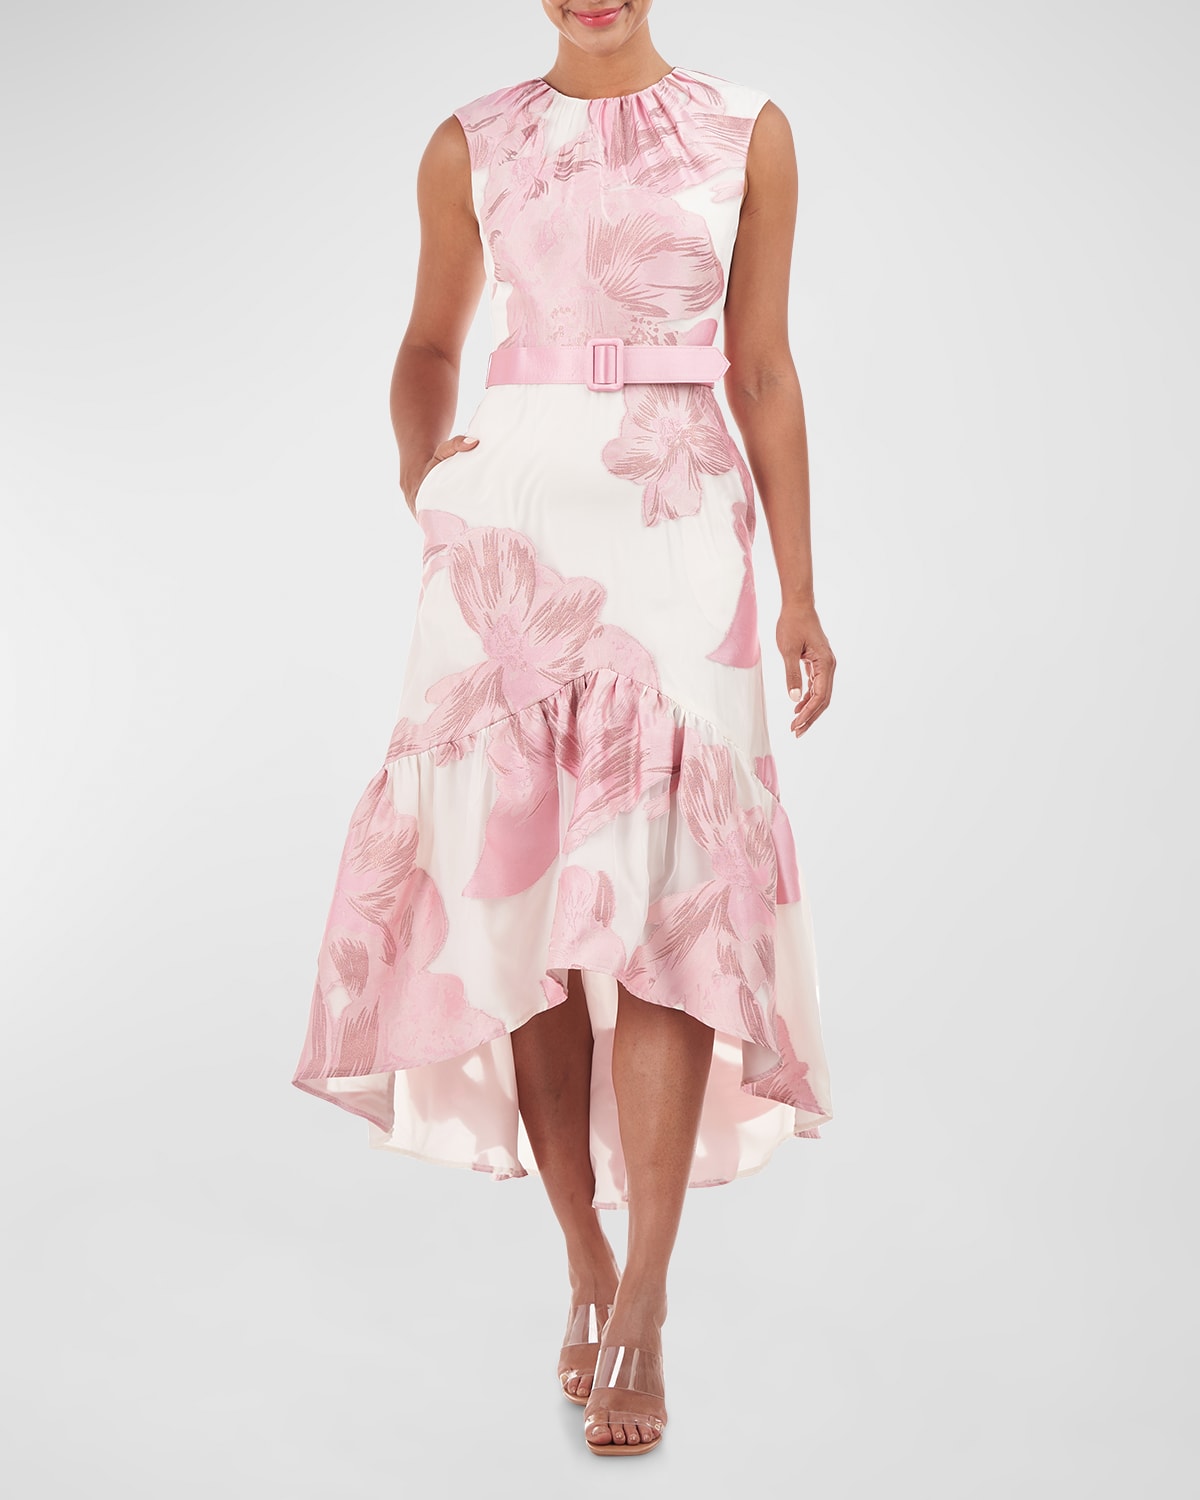 KAY UNGER HIGH-LOW BELTED FLORAL-PRINT MIDI DRESS